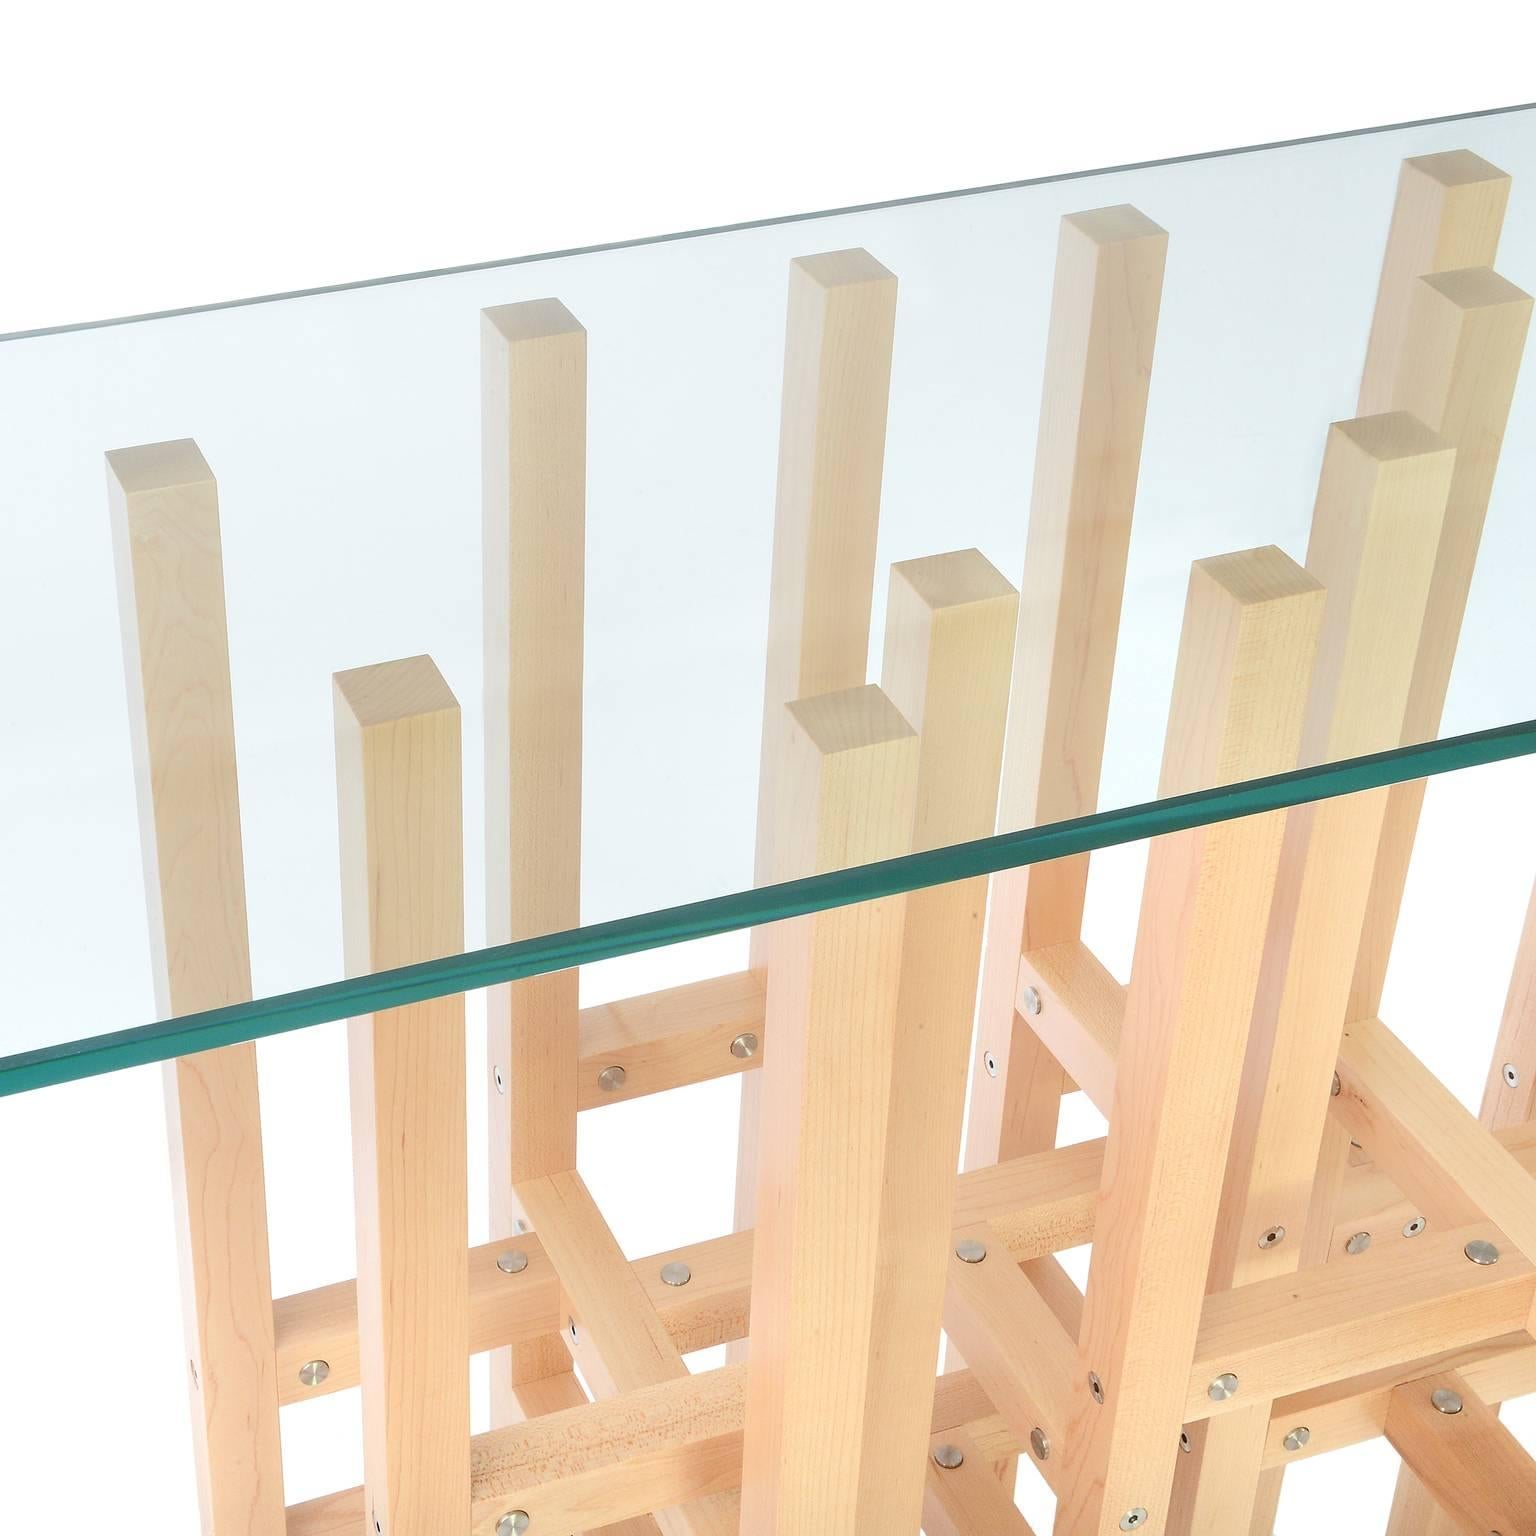 The Europa table by Peter Harrison is an intoxicating frenzy of elements which cross and overlap and resonate in the is modern console. 25 legs touch the floor and the glass. 45 horizontal elements create the structure. Levelers in each leg assure